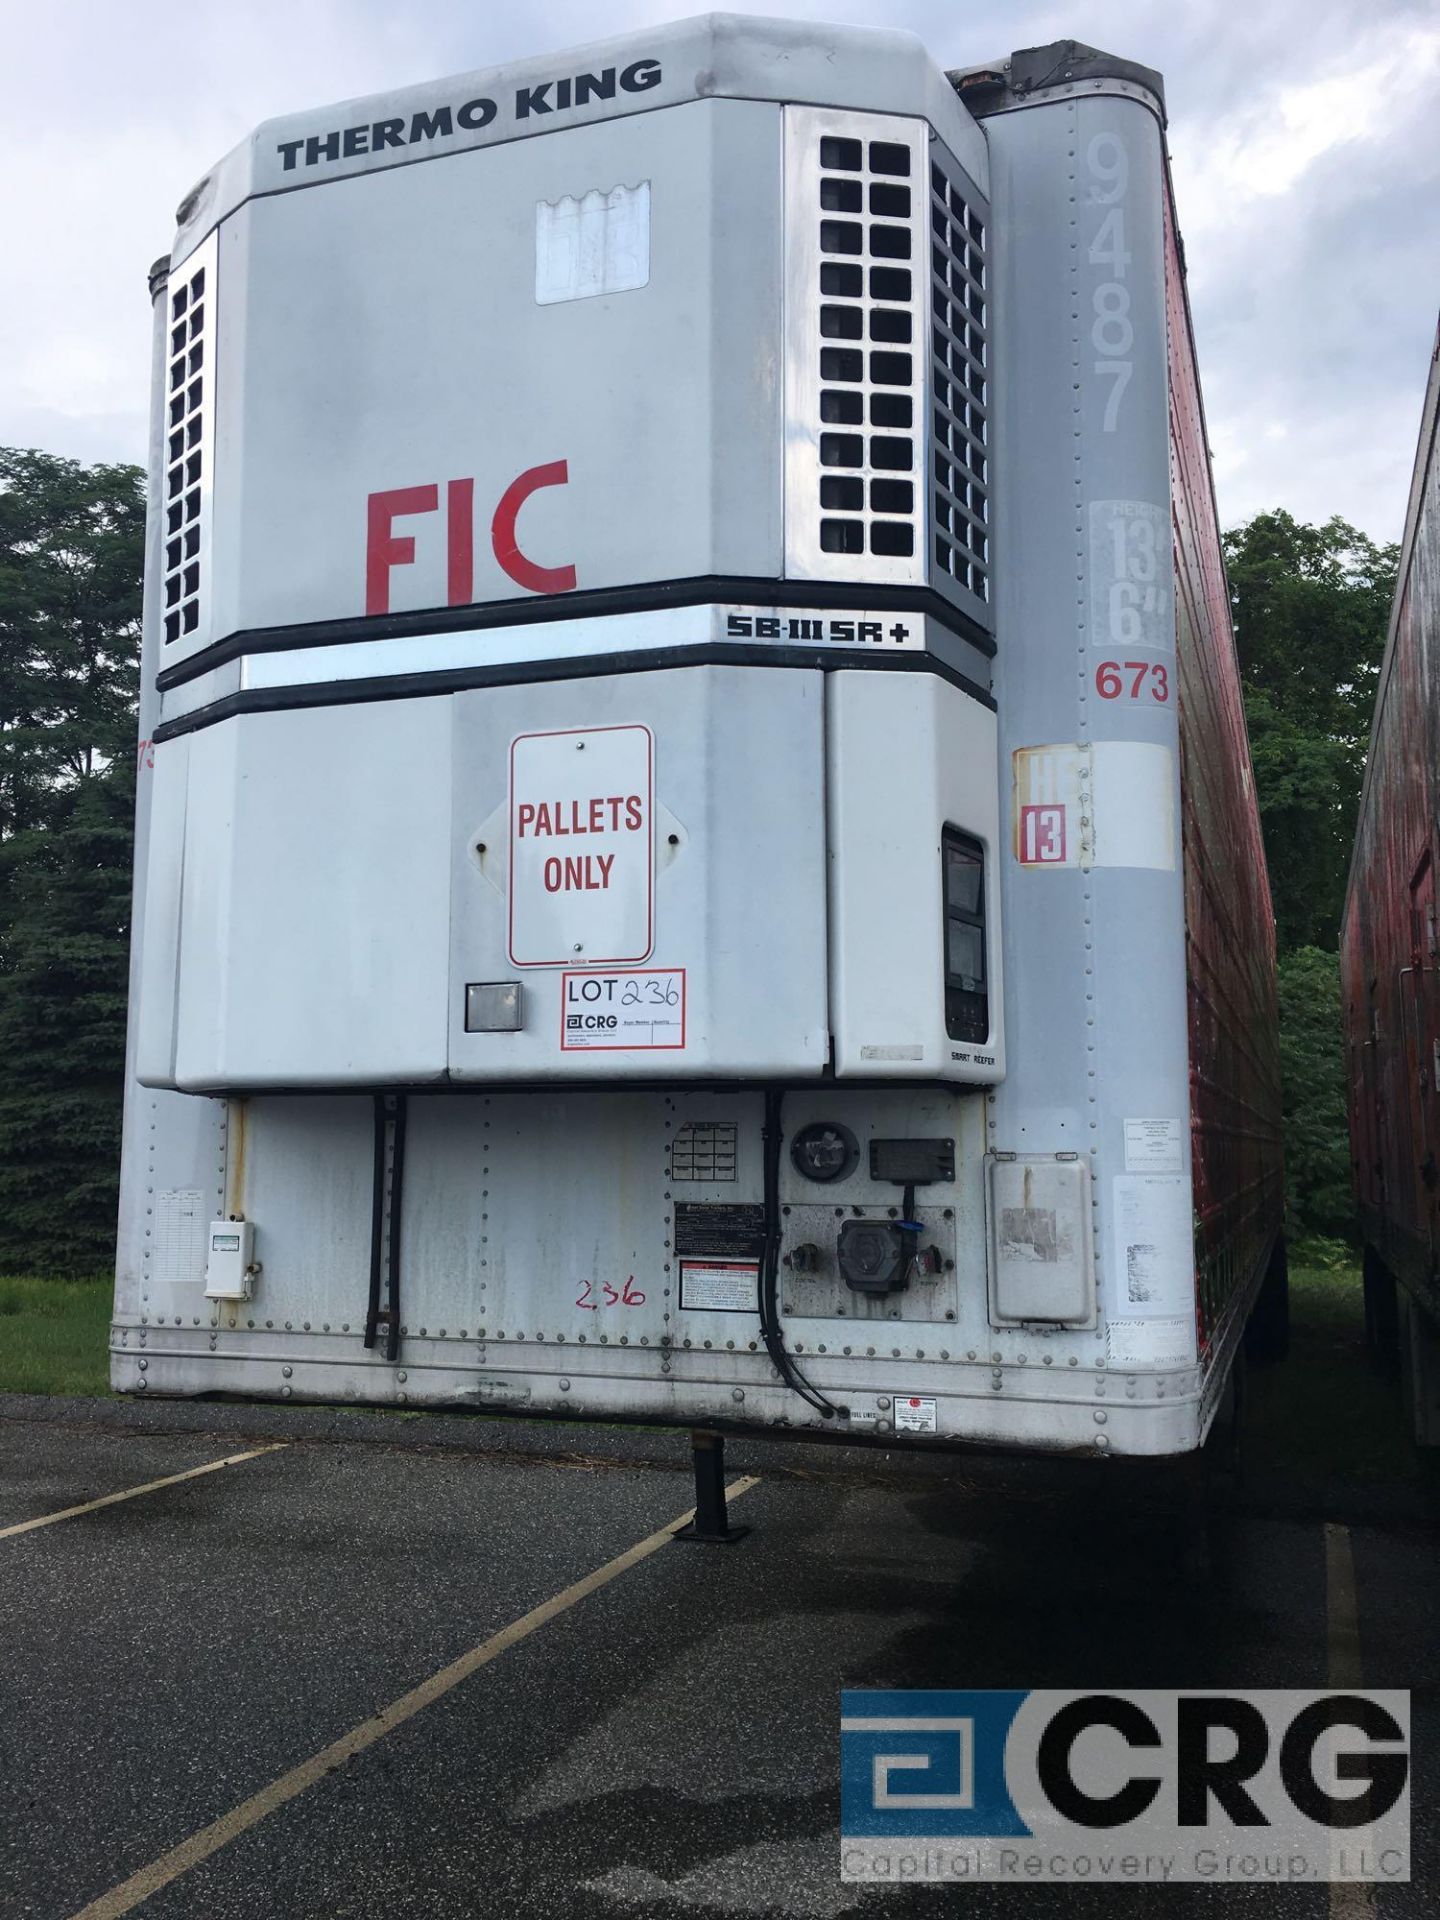 Multi Temp Refrigerated Semi Trailer - 32013 n/s hours, 1GRAA9624TW74706 - Image 2 of 5